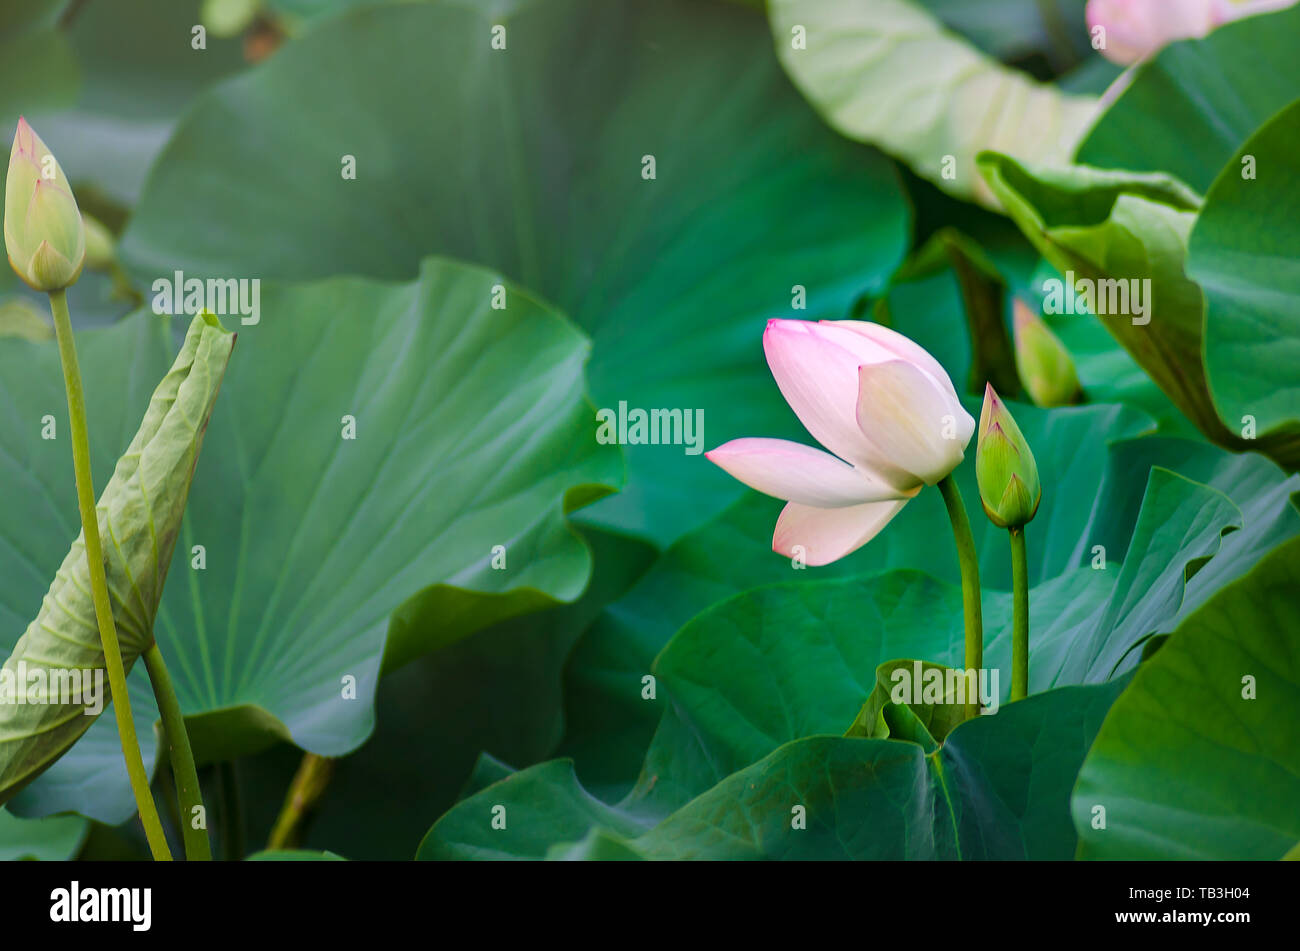 Blooming lotus flower bud and green leaves Stock Photo